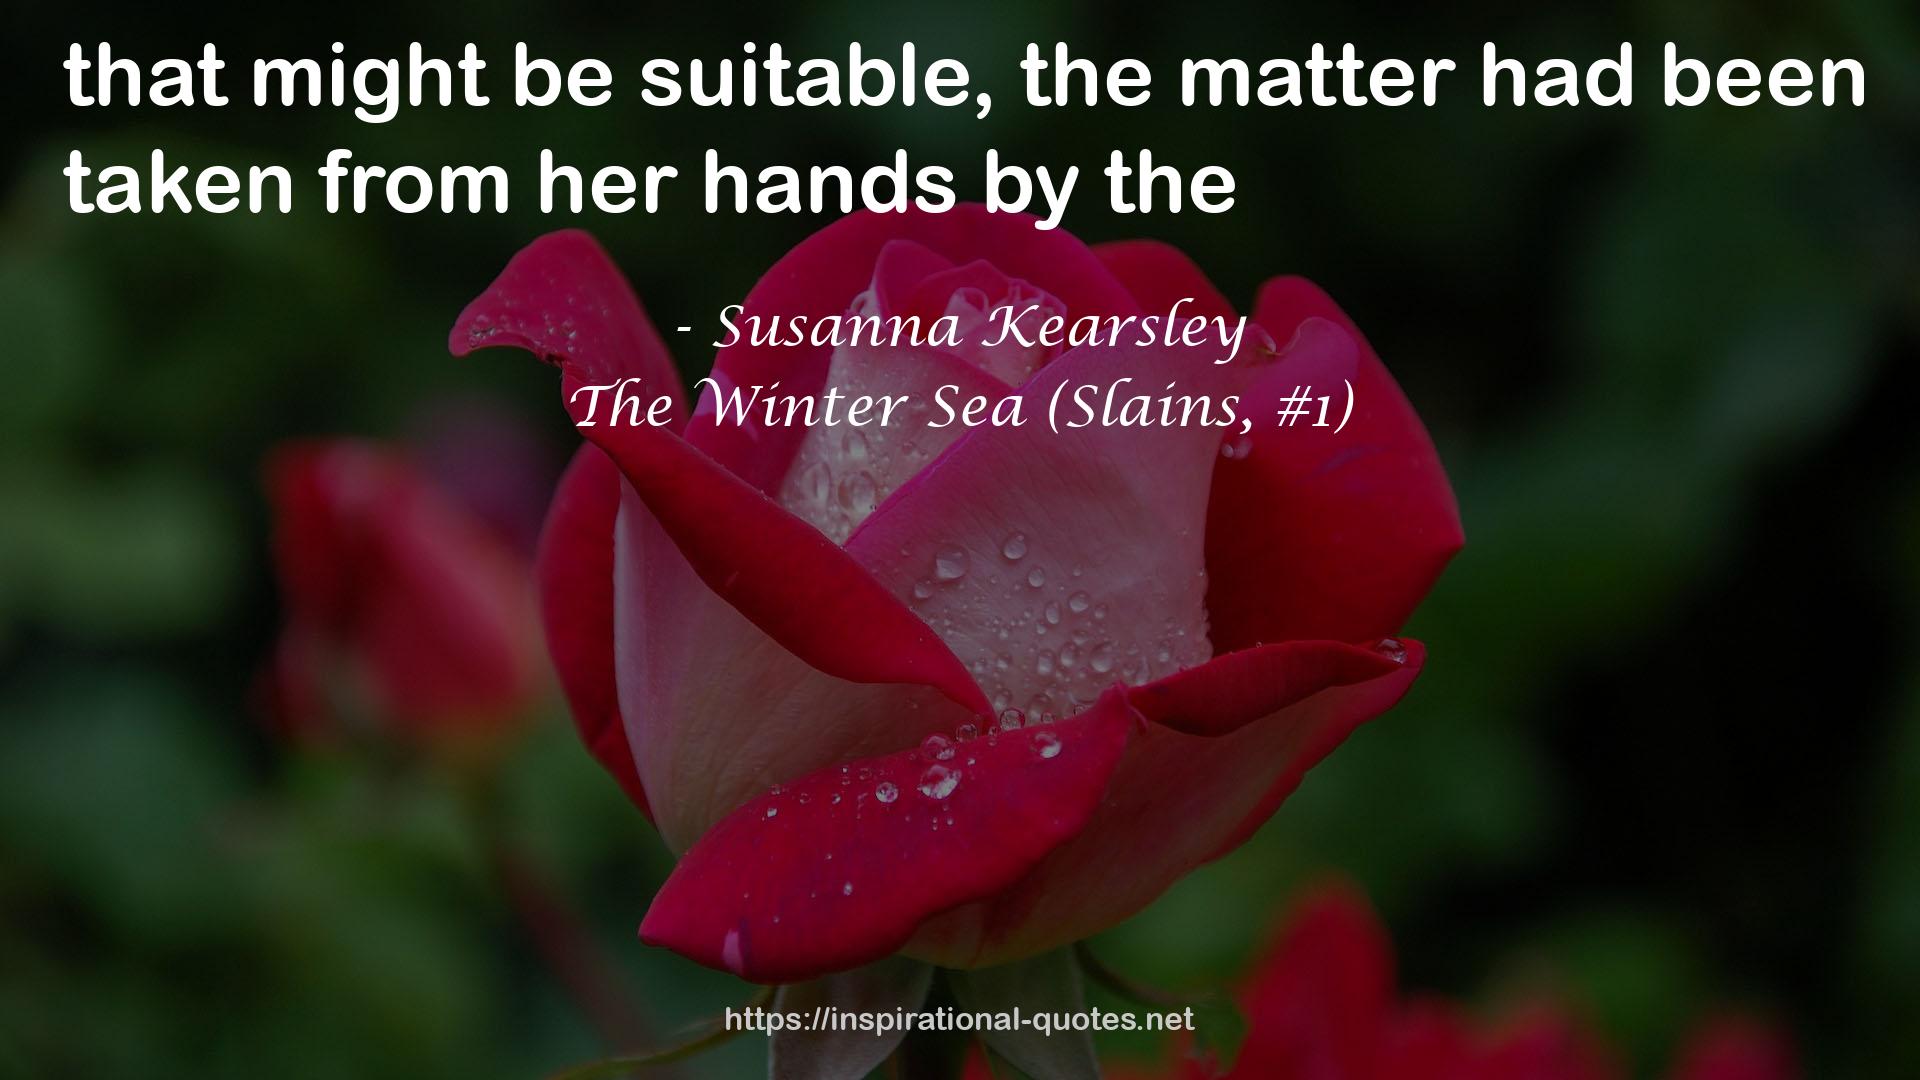 The Winter Sea (Slains, #1) QUOTES